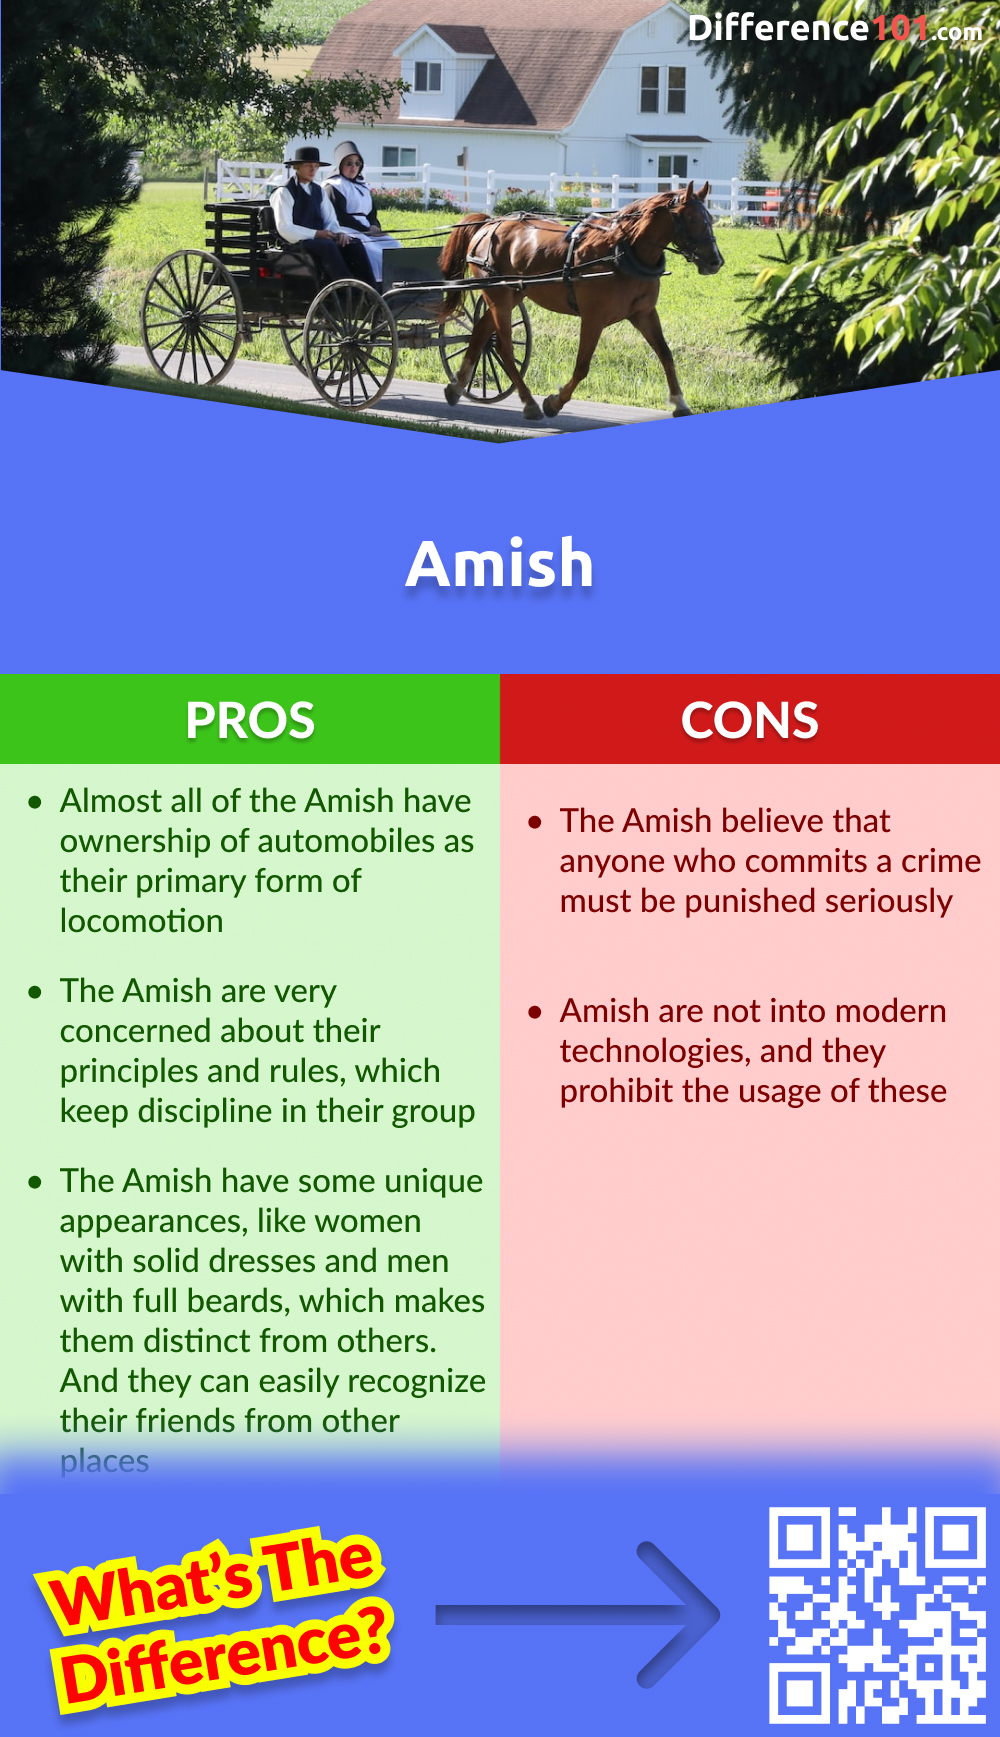 Amish Pros and Cons